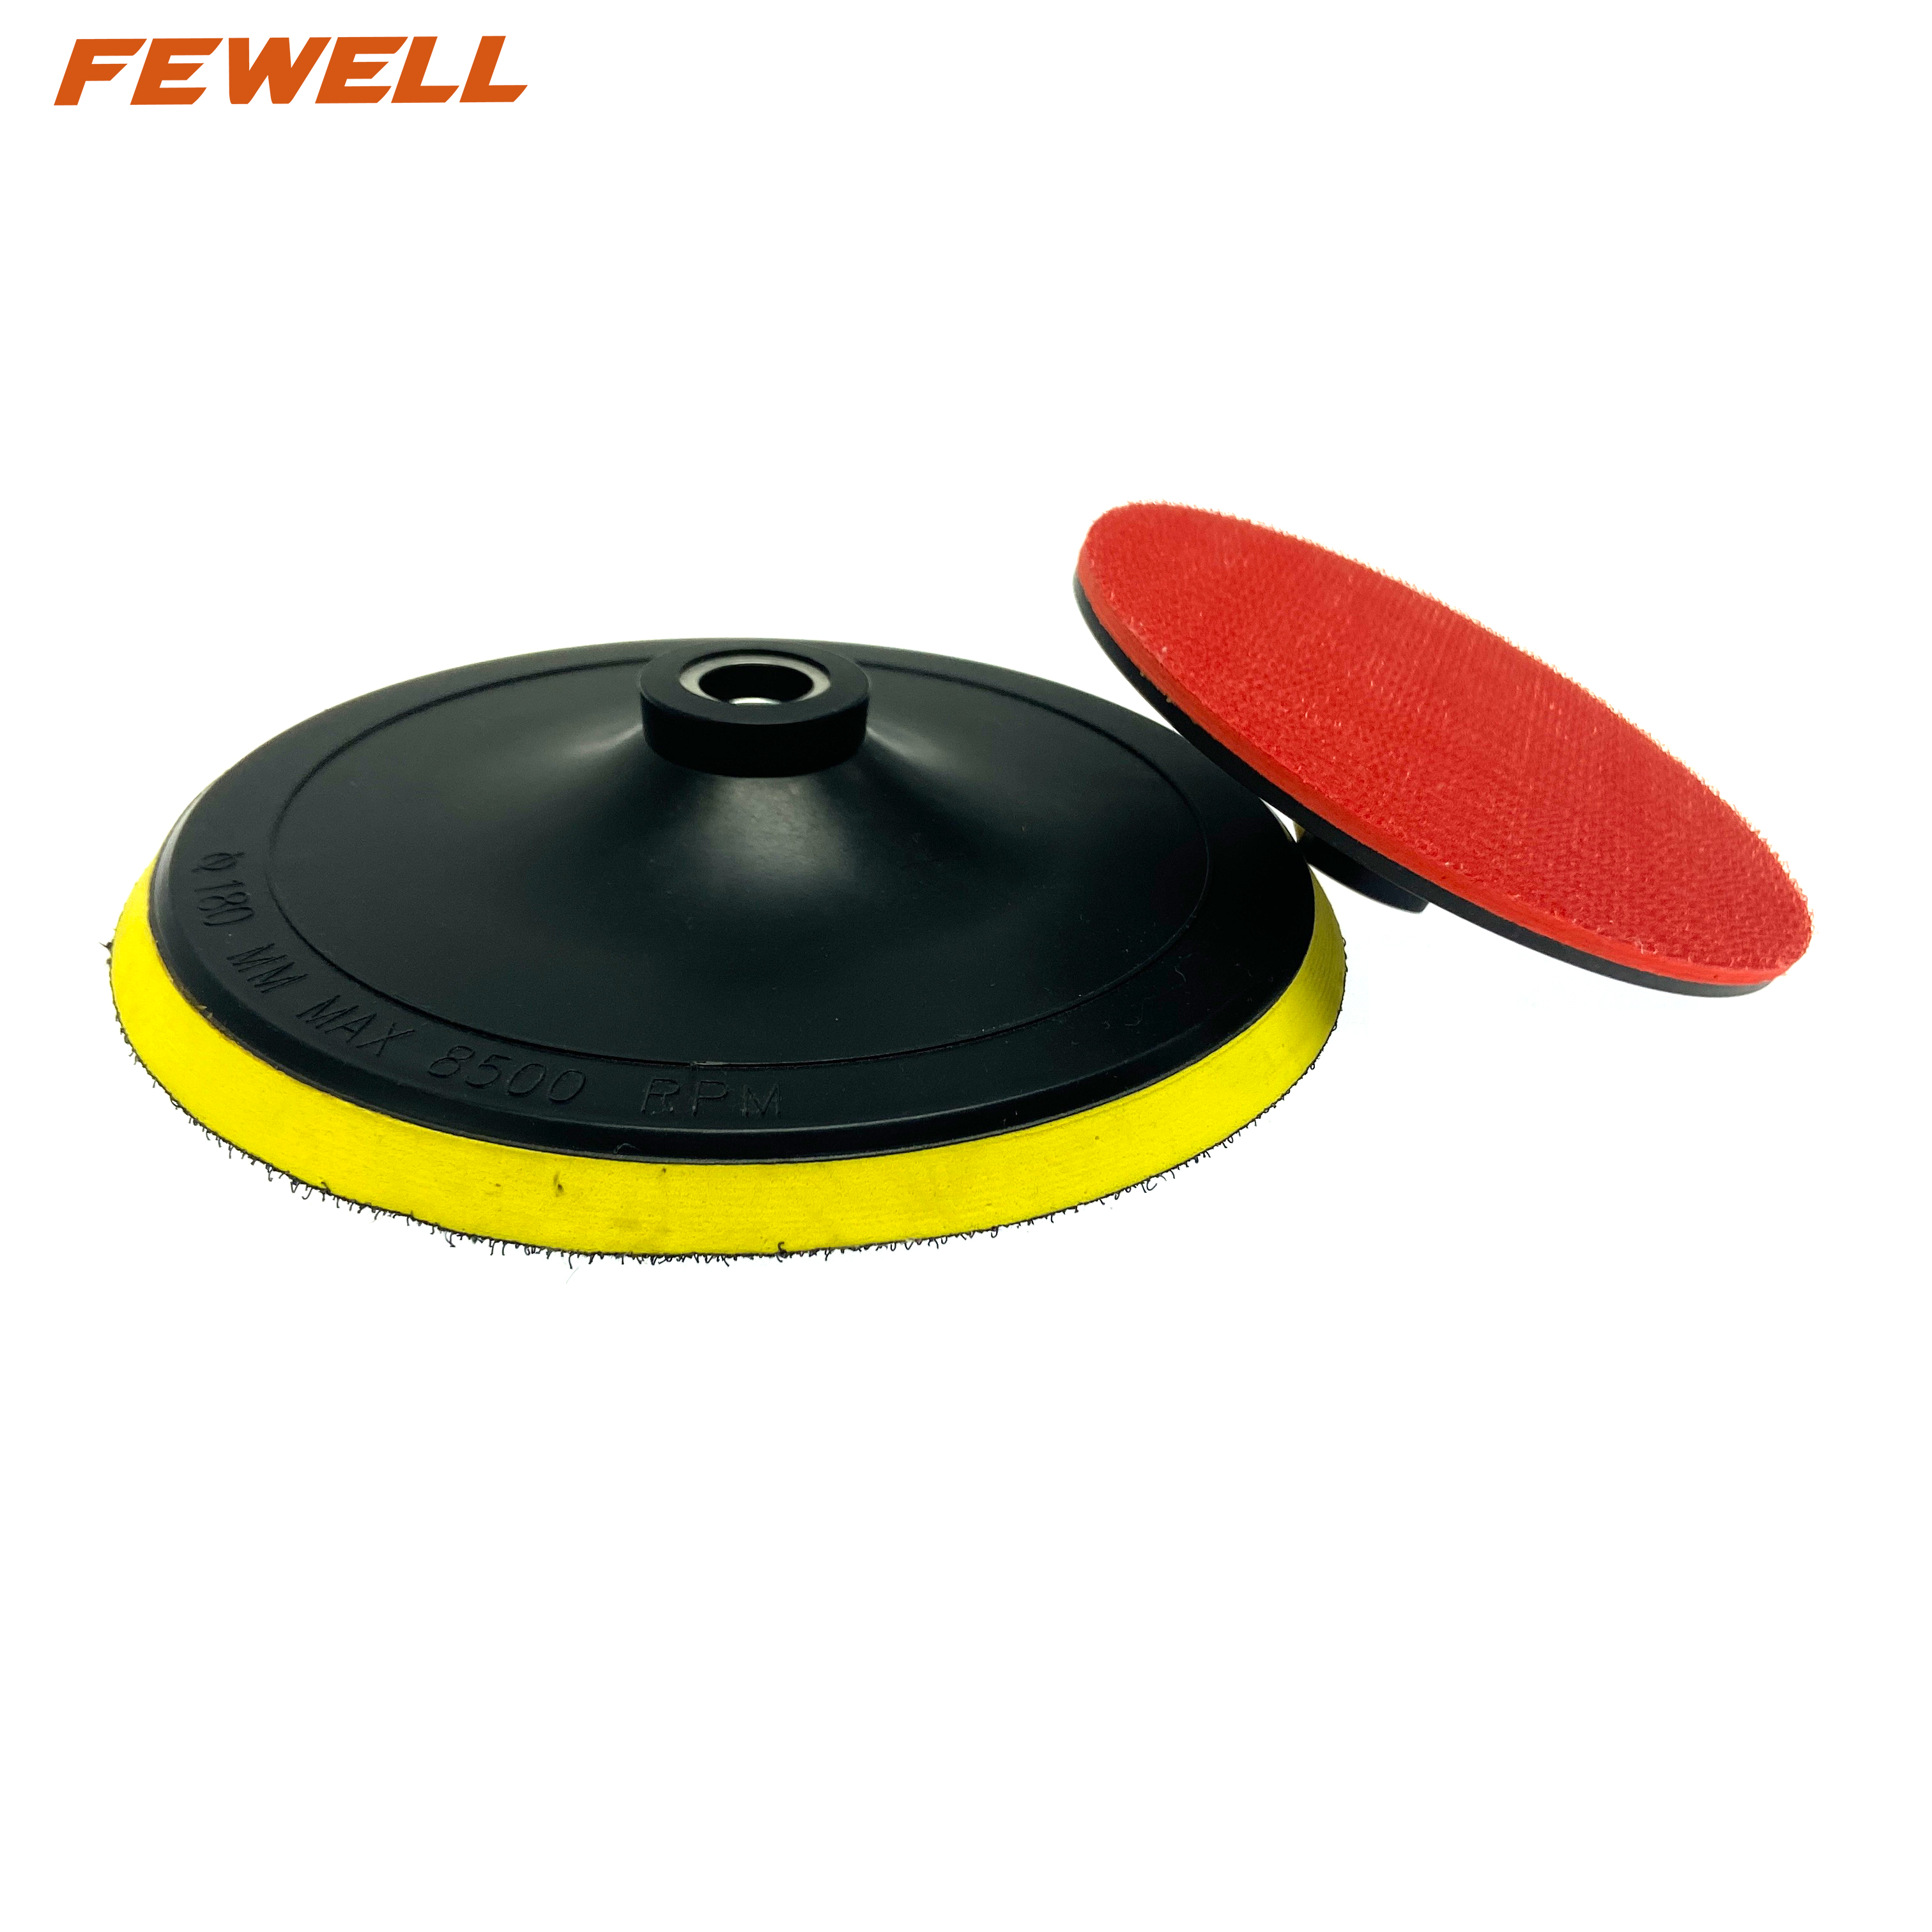 High quality 7 Inch 180mm M14 Rubber Hook and Loop Back Plate Holder Pads for Diamond abrasives Polishing Pads